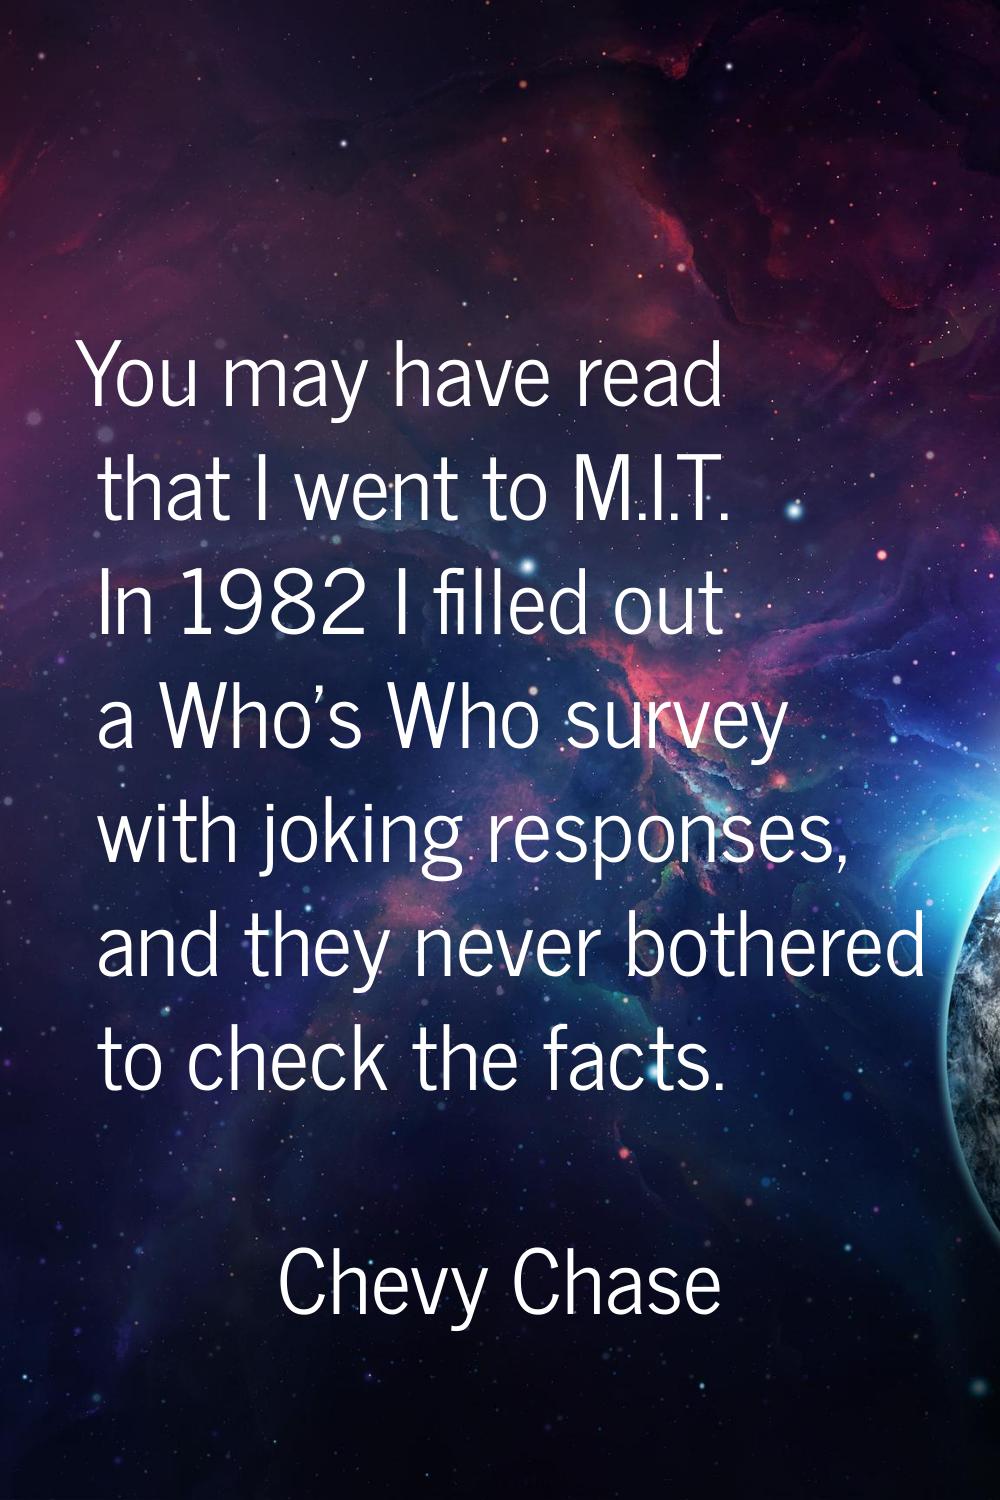 You may have read that I went to M.I.T. In 1982 I filled out a Who's Who survey with joking respons